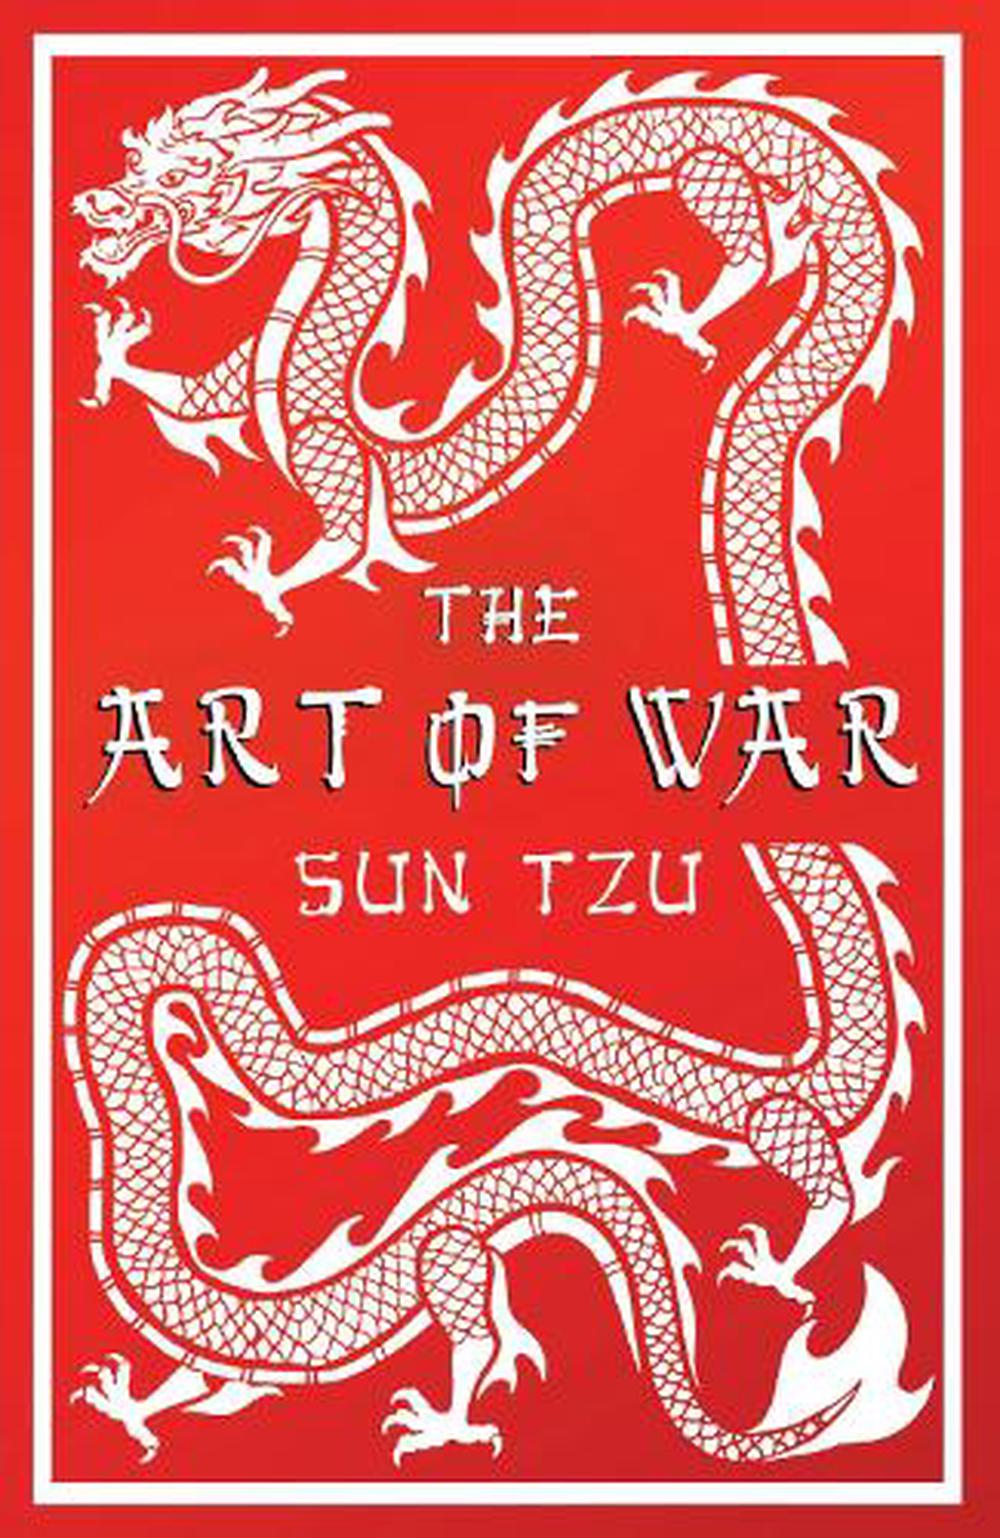 Art Of War By Sun Tzu Paperback 9781847497468 Buy Online At Moby The Great